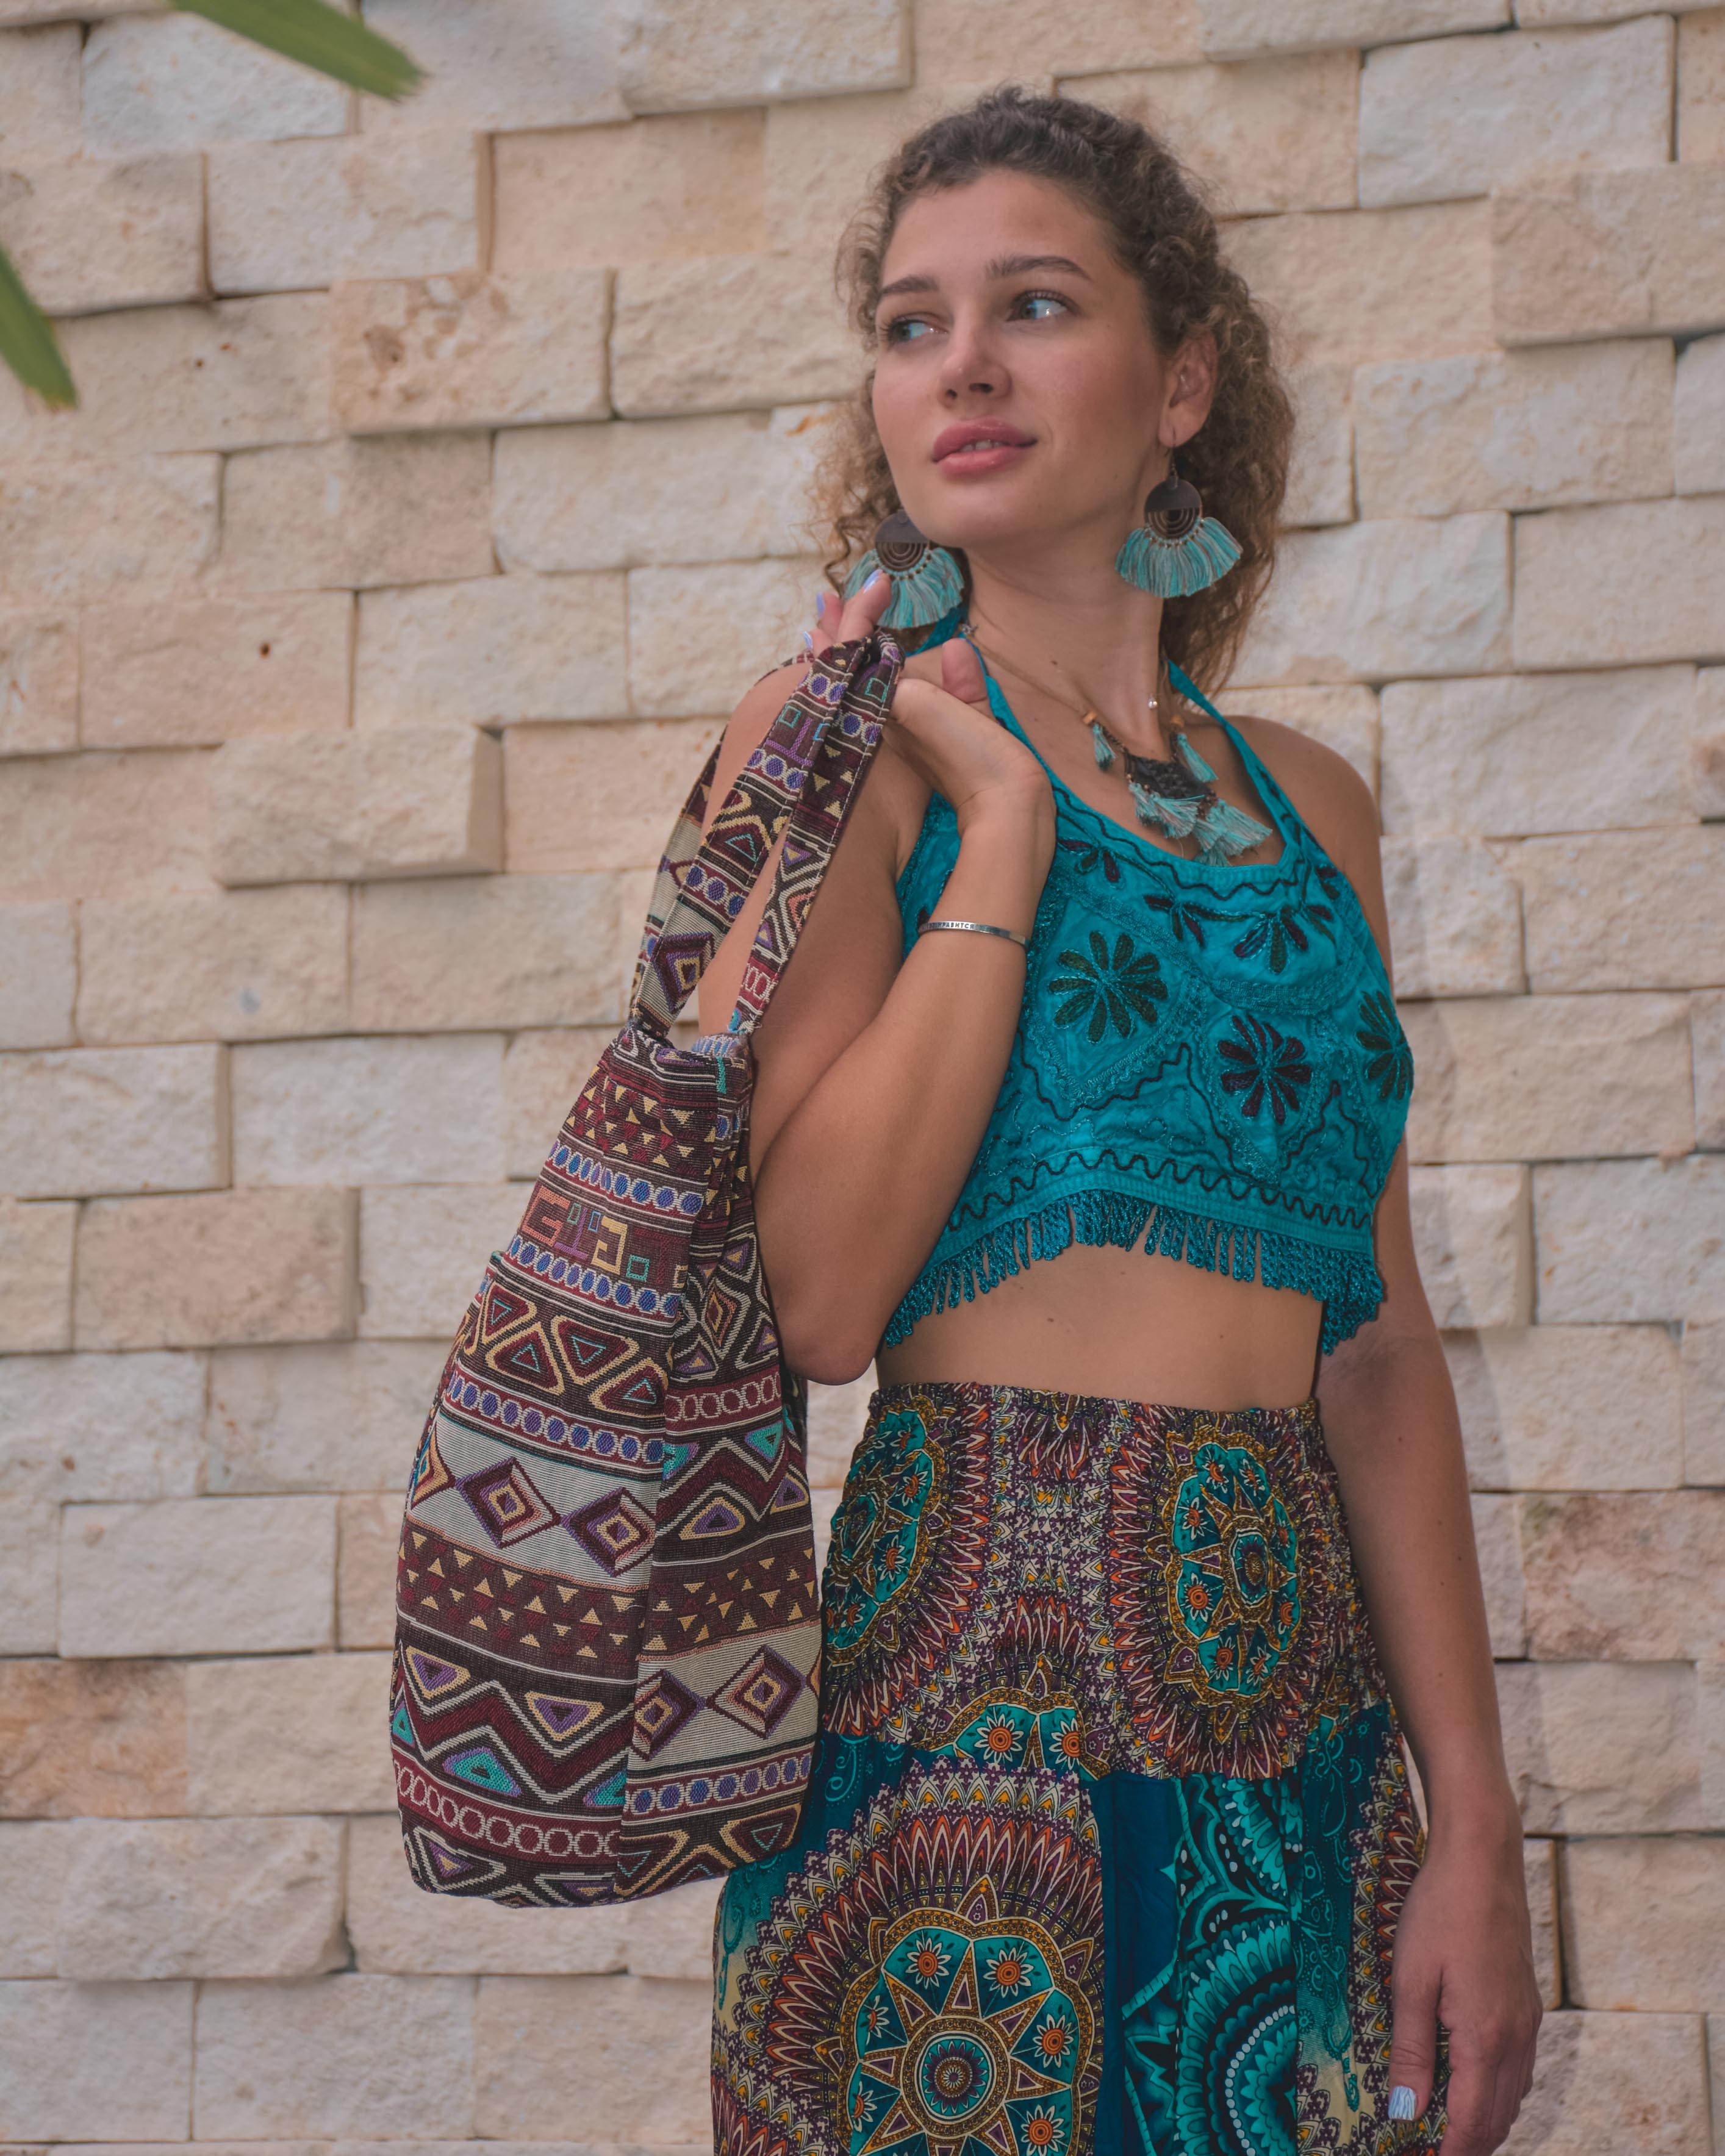 PERSIA BEACH BAG Elepanta Beach Bags - Buy Today Elephant Pants Jewelry And Bohemian Clothes Handmade In Thailand Help To Save The Elephants FairTrade And Vegan